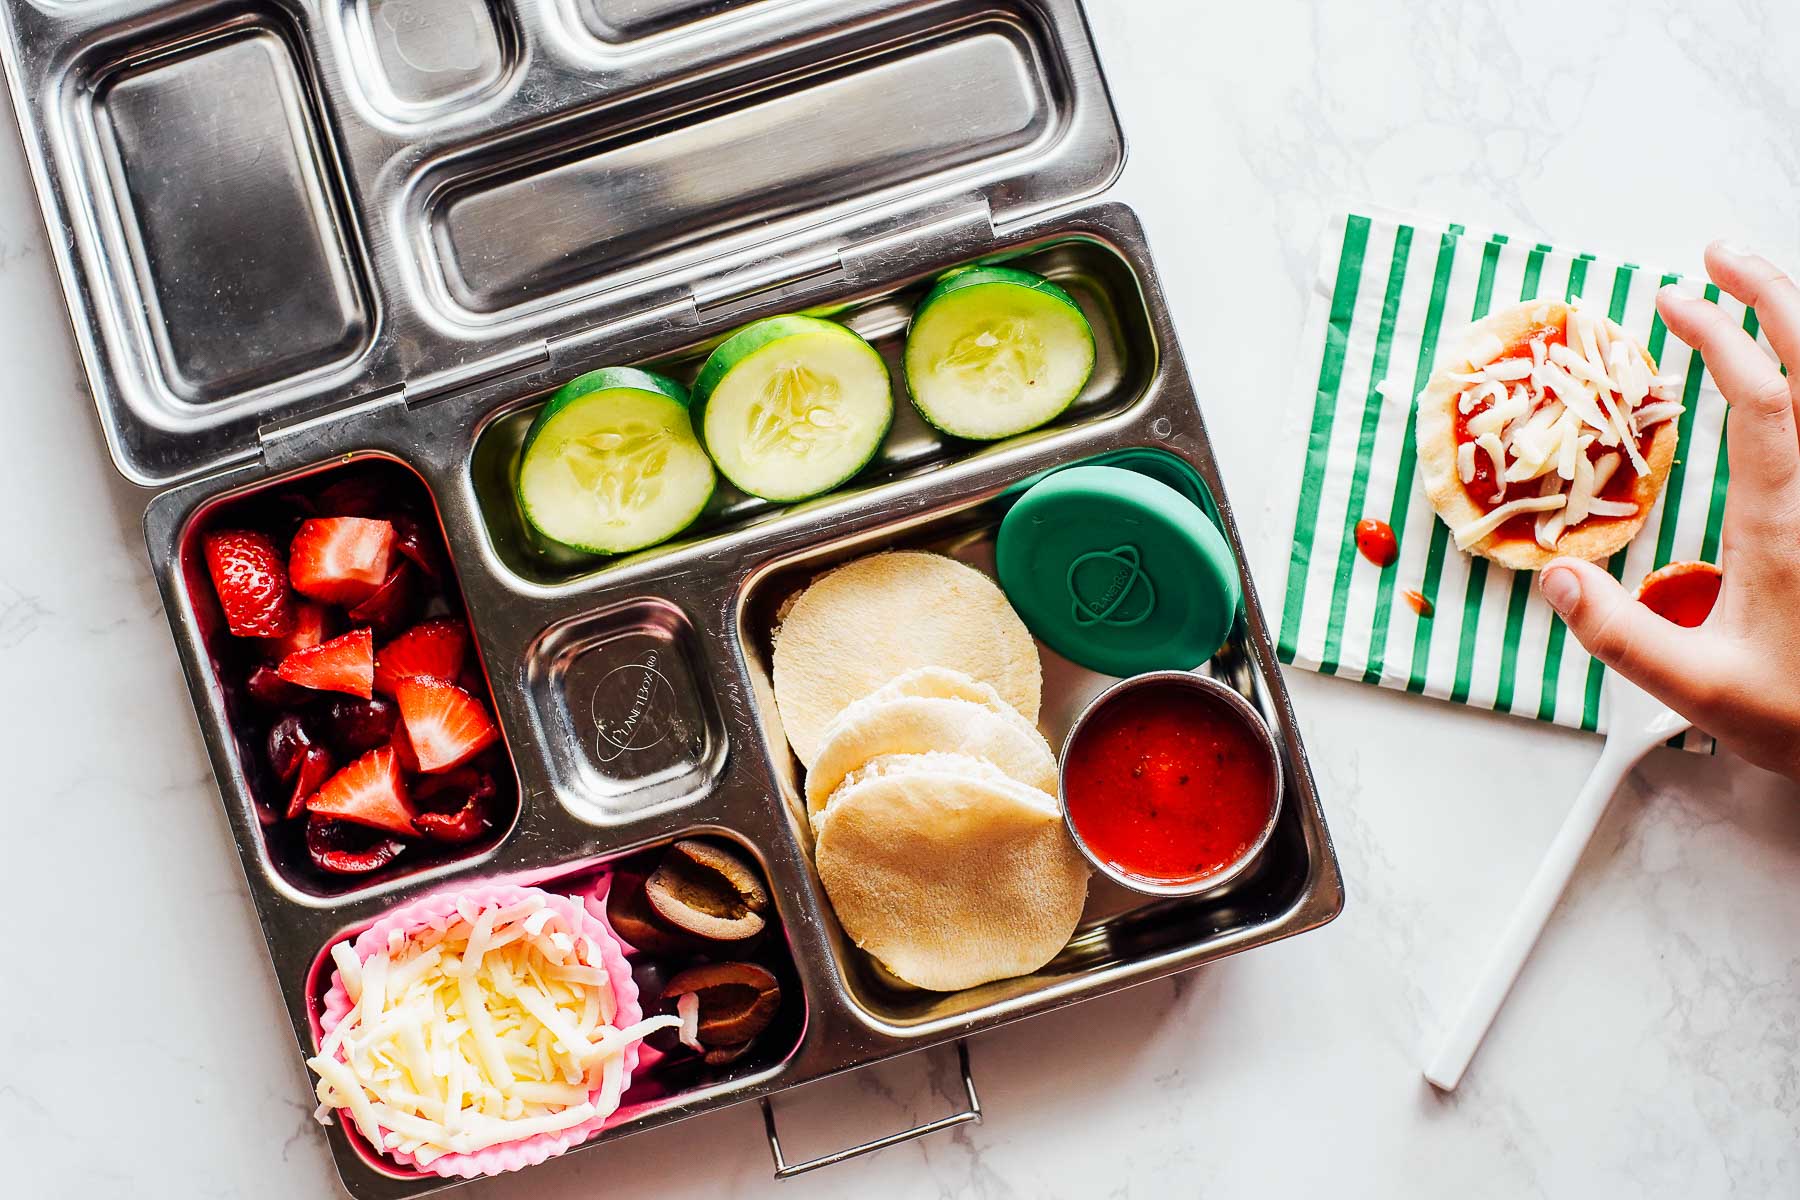 Pizza lunchable with strawberries and cucumbers.